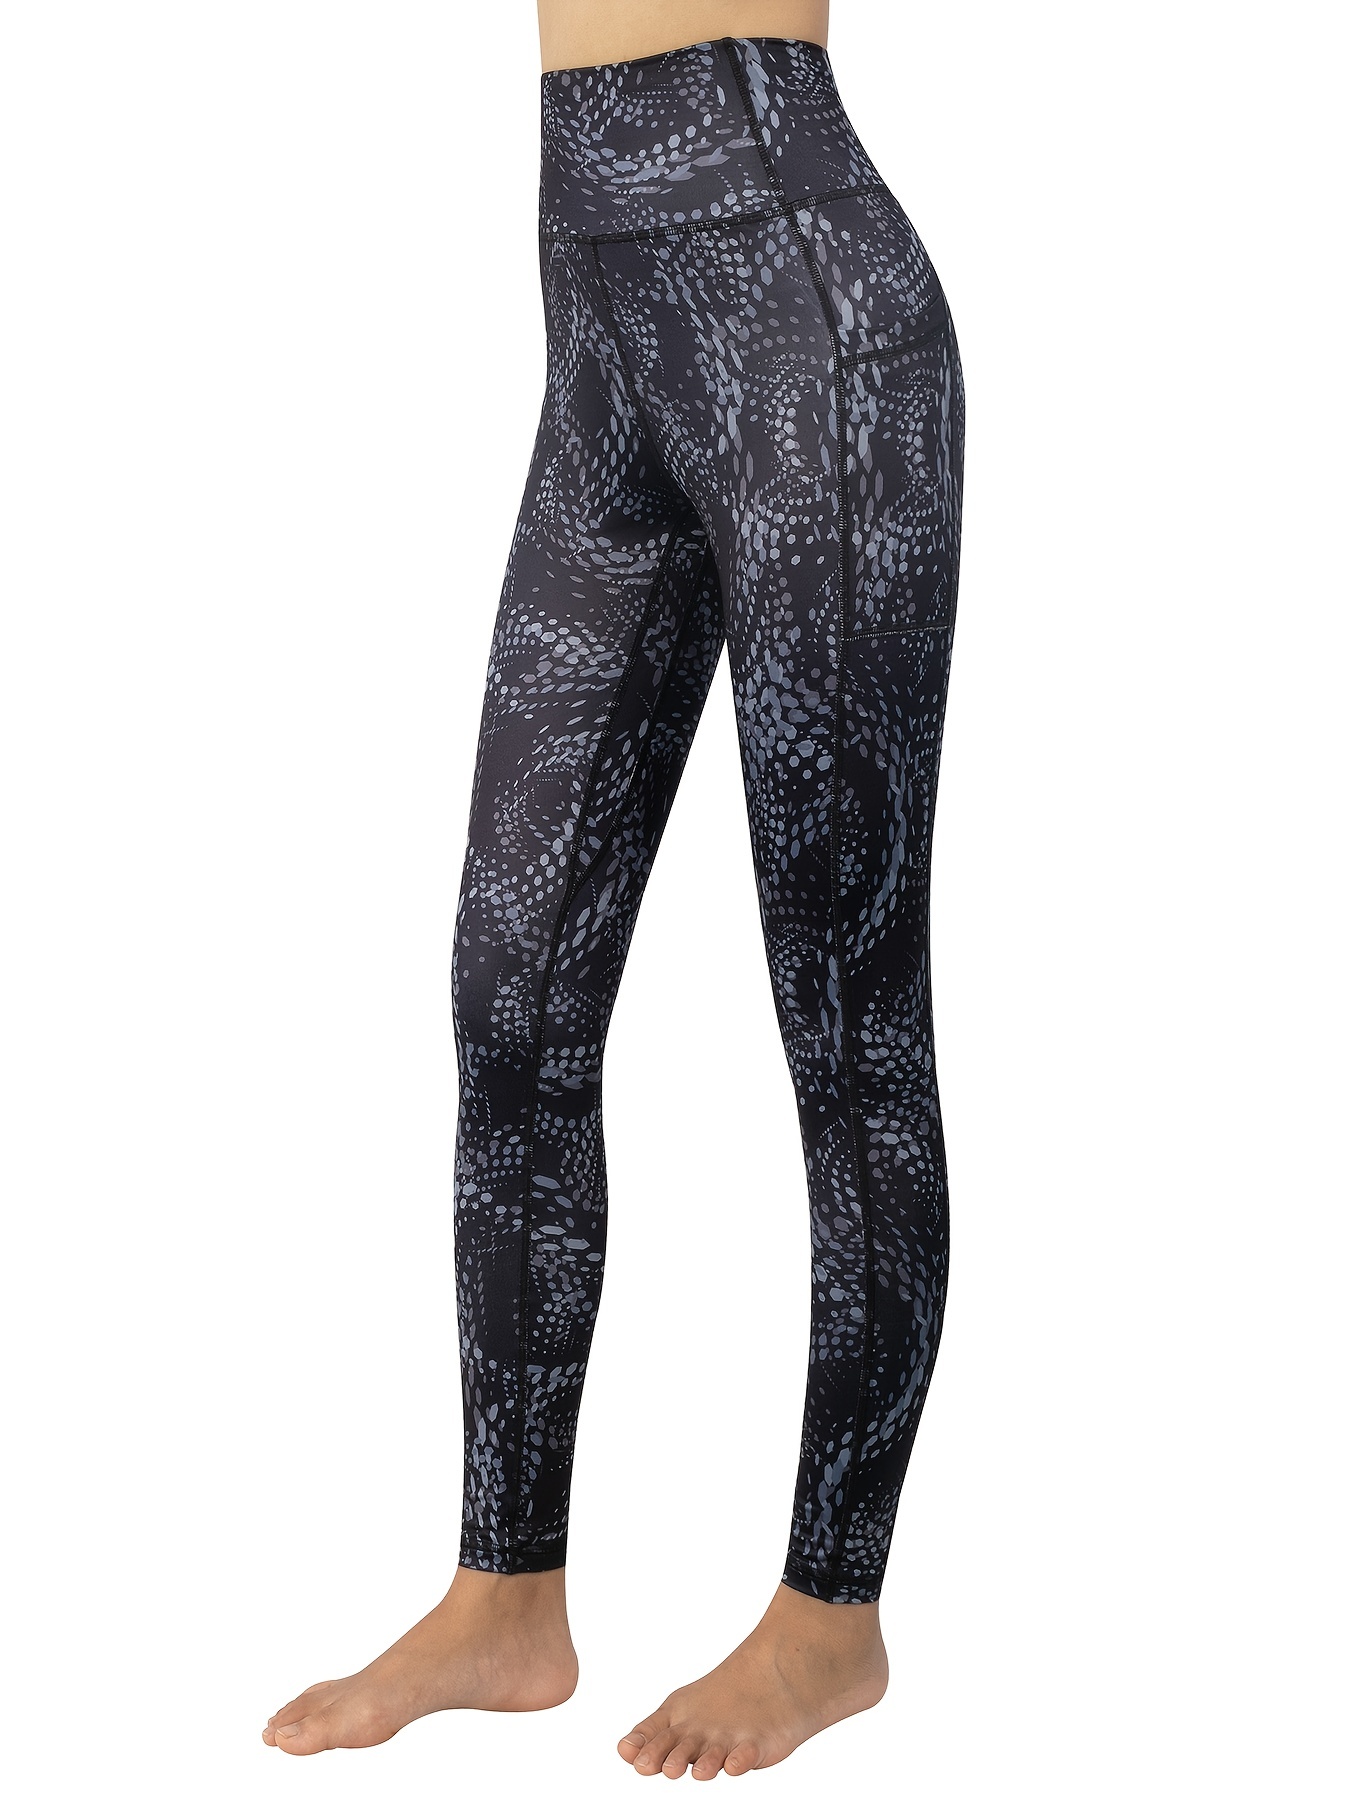 High-Waisted Yoga Leggings with Phone Pocket and Sweat Absorption for  Women's Fitness and Activewear